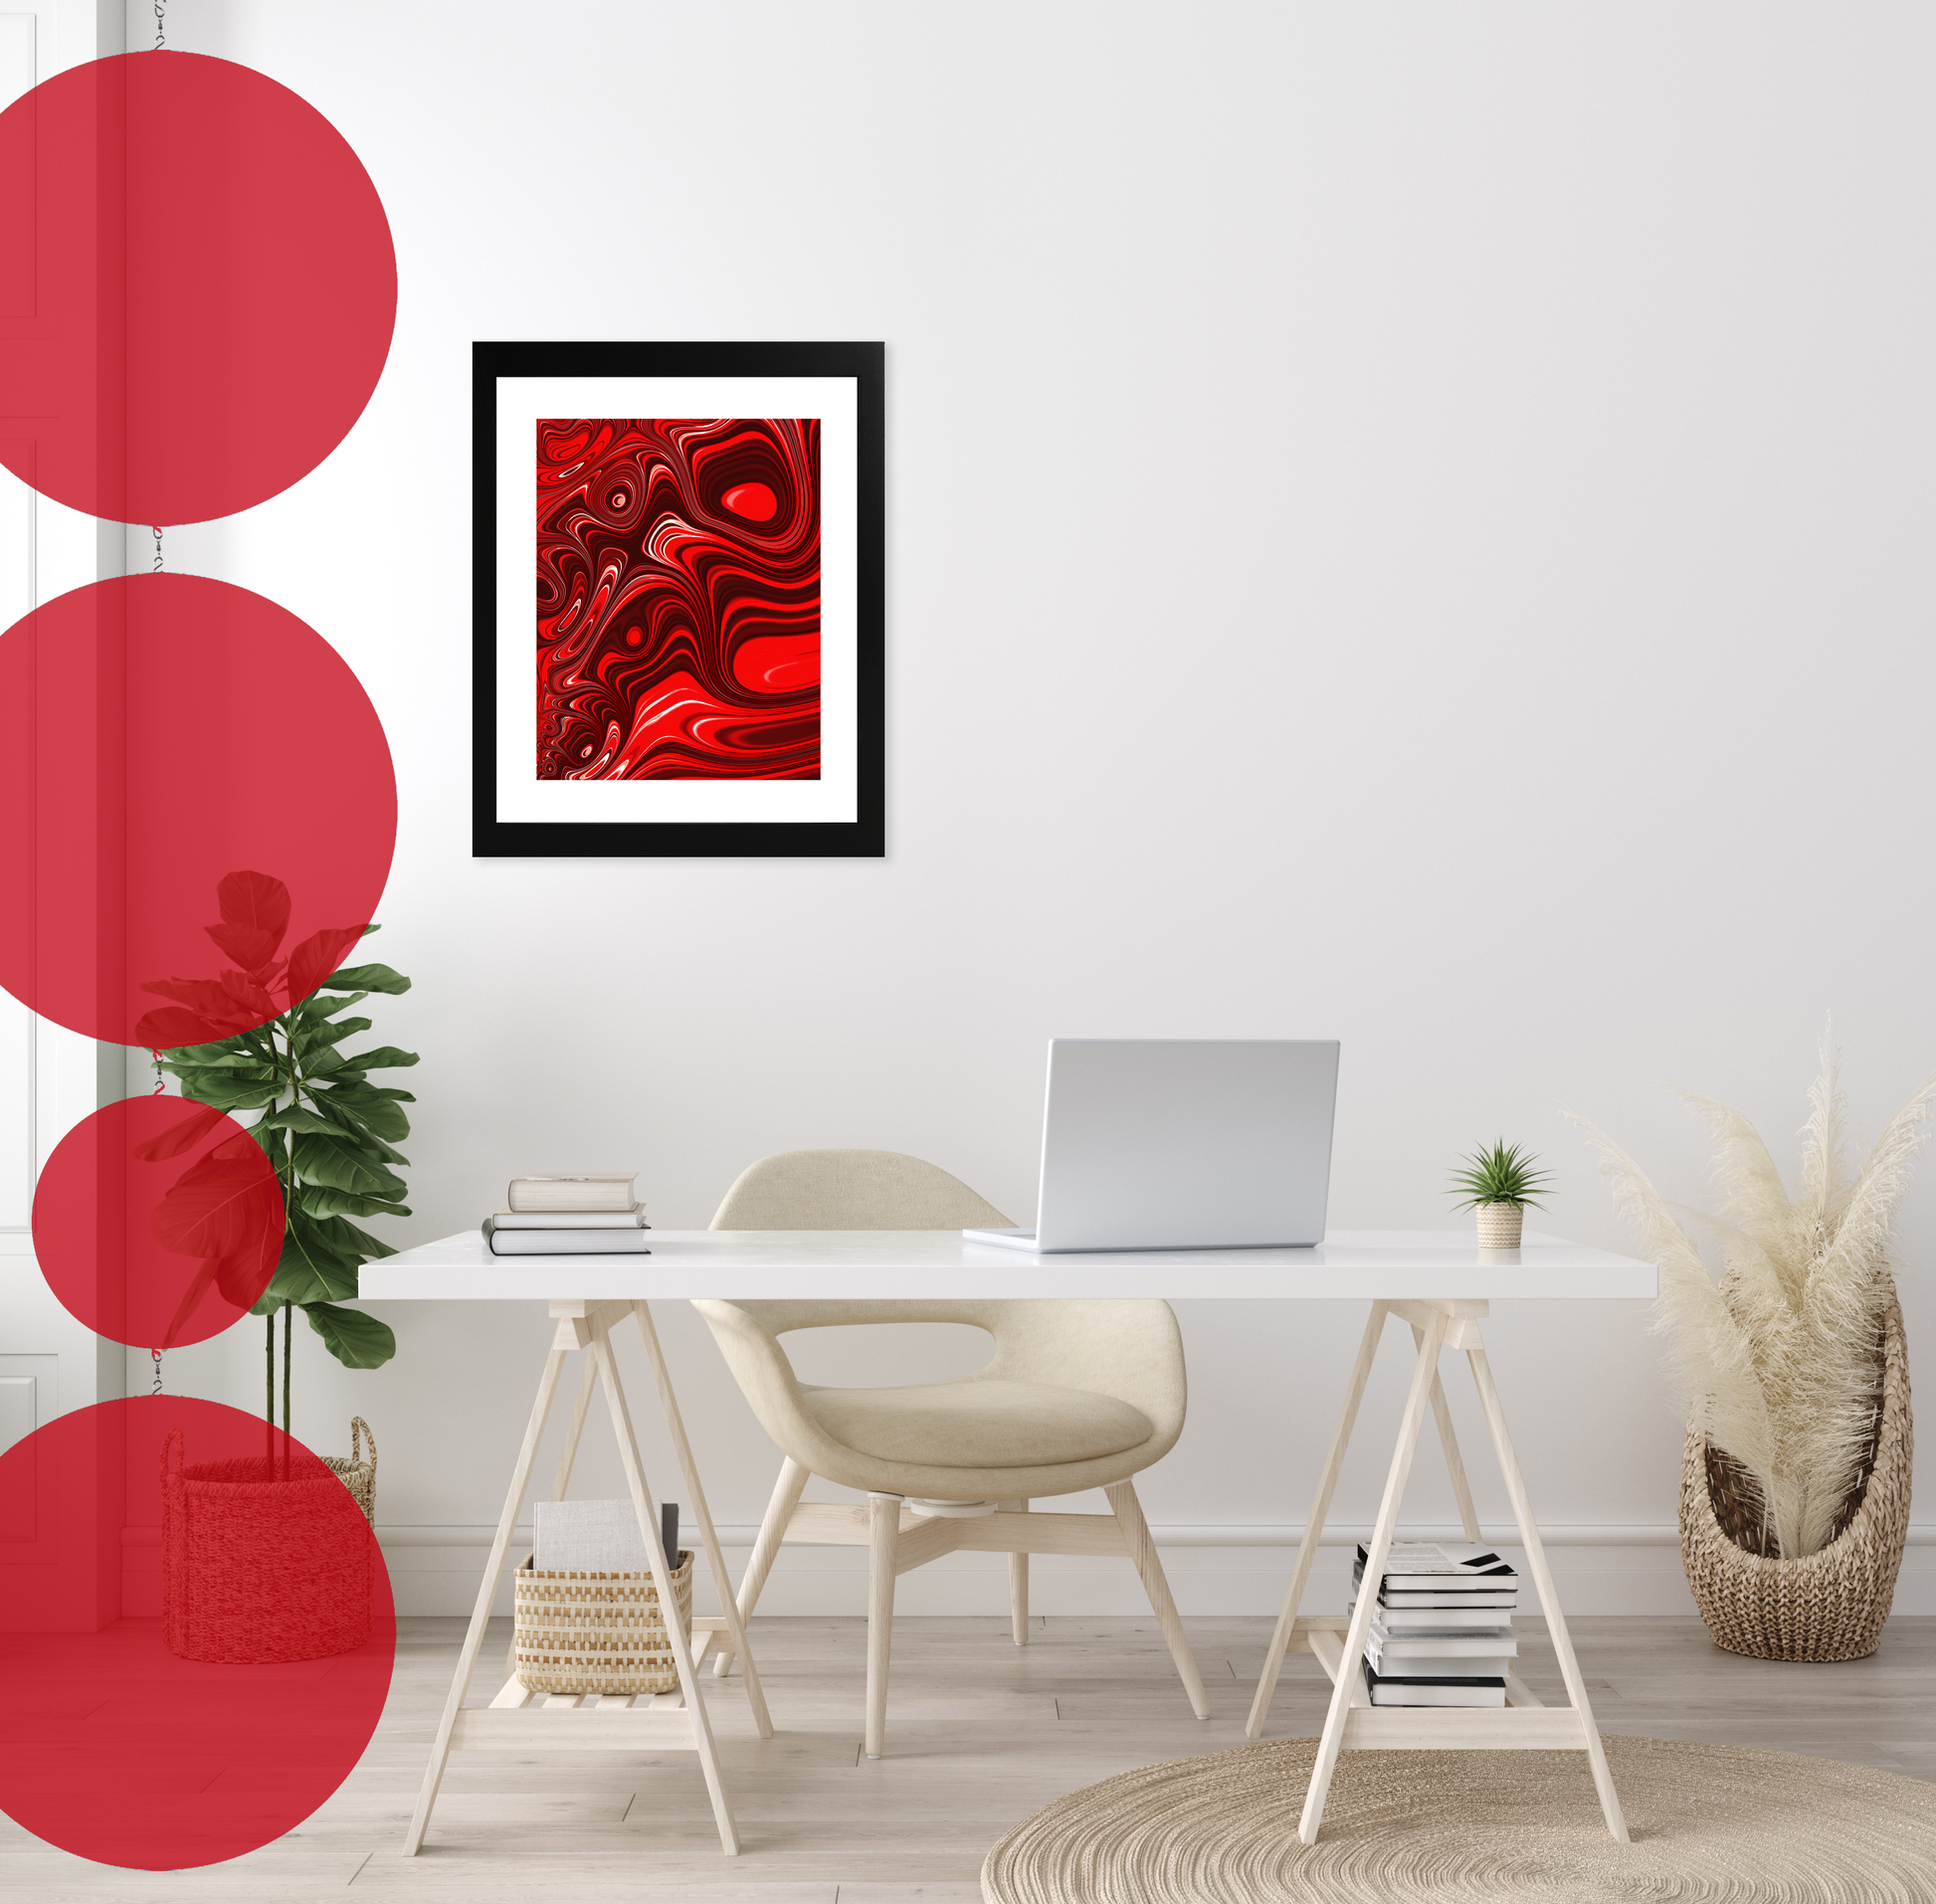 Home Office with desk, computer, framed abstract art, and XL BOLD AF Hanging Modern Art Mobile Sculpture in clear transparent red acrylic by AtomicMobiles.com